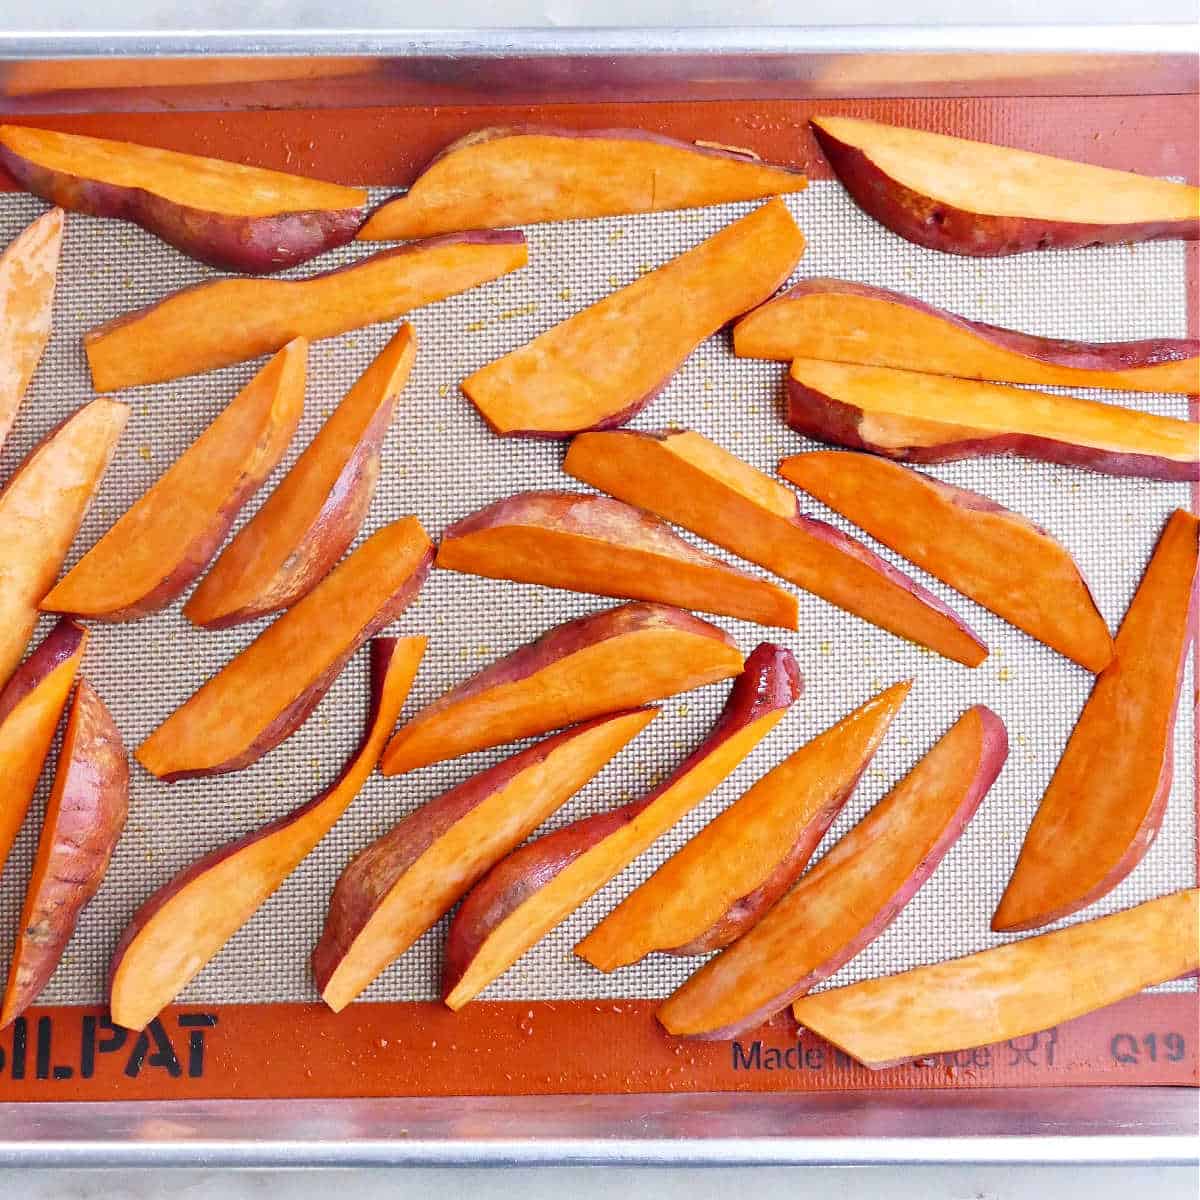 sliced sweet potato wedges on a baking sheet before being roasted